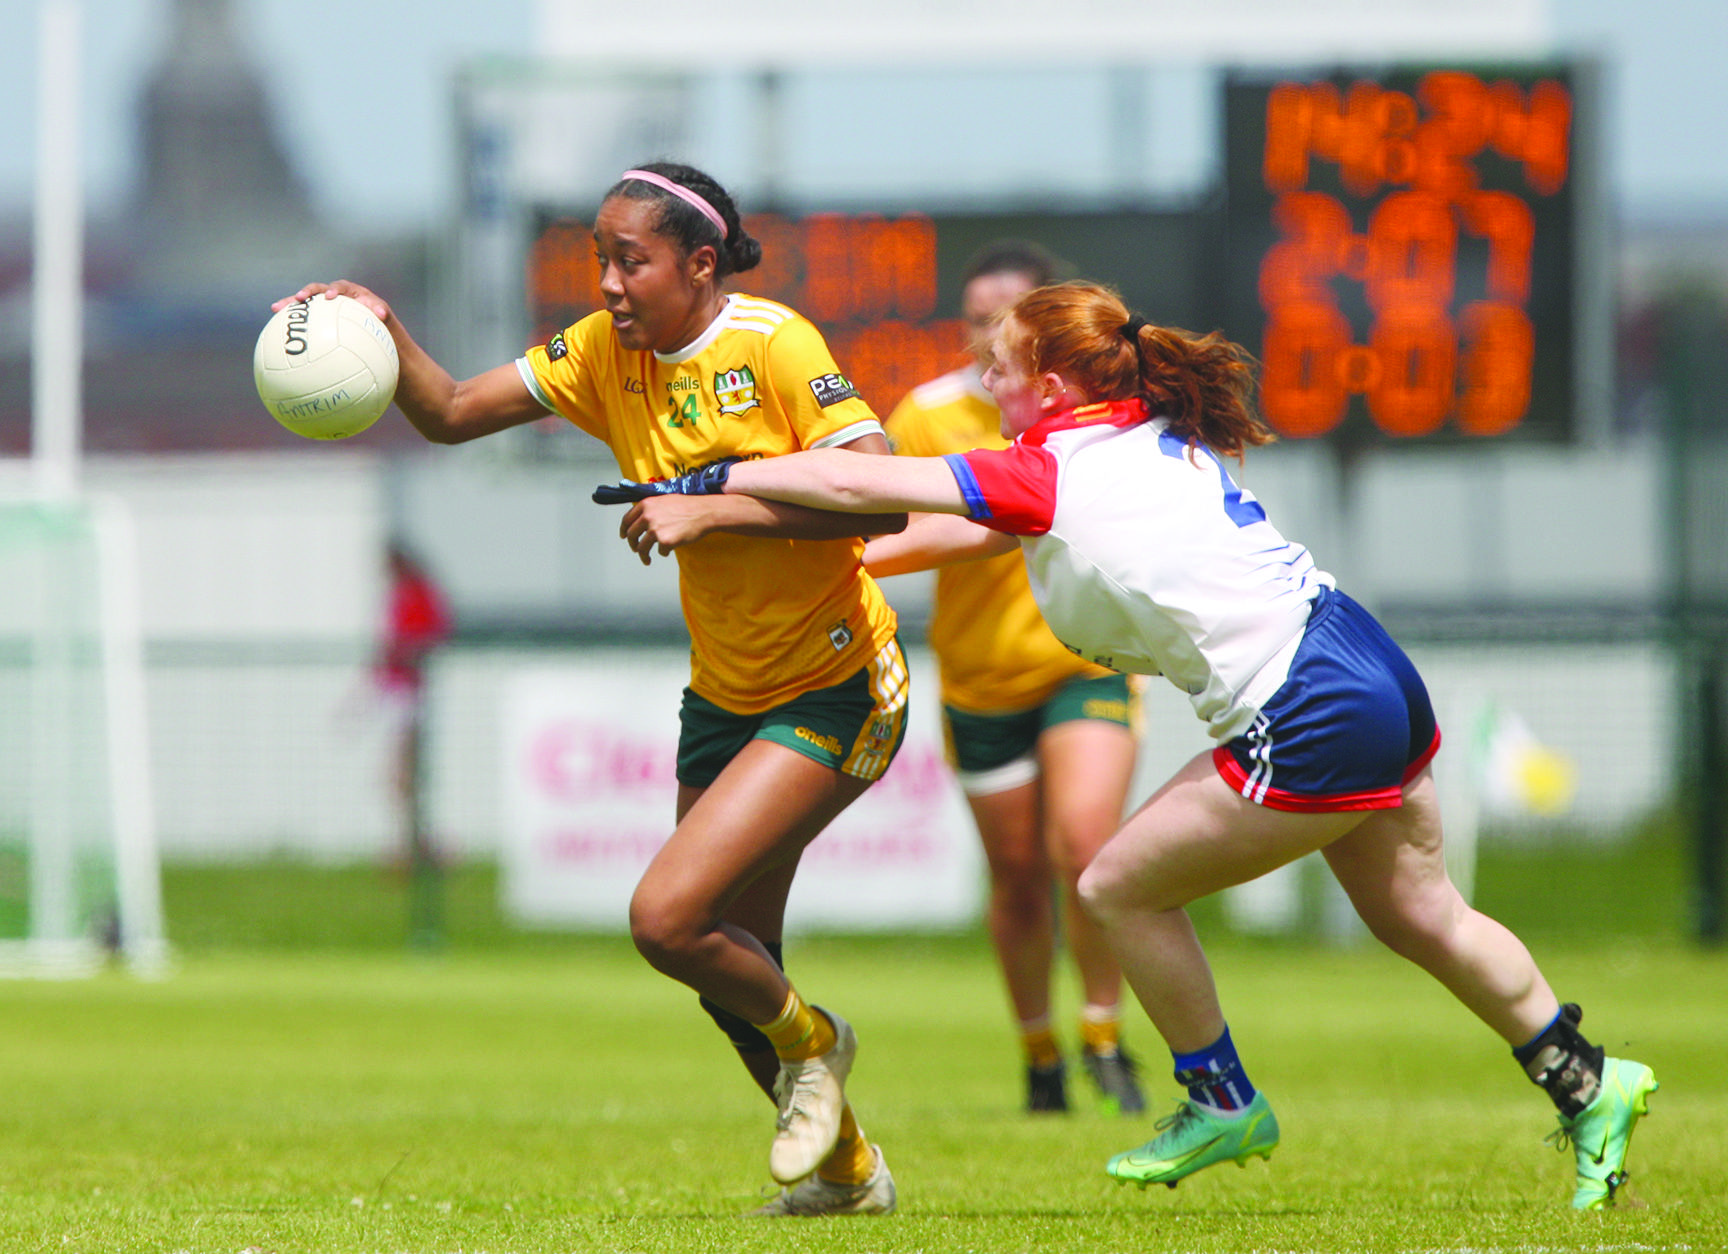 Antrim were convincing winners over New York last month, but manager Emma Kelly has urged her side to produce an improved performance against Carlow on Sunday as they bid for a return to the All-Ireland Junior final